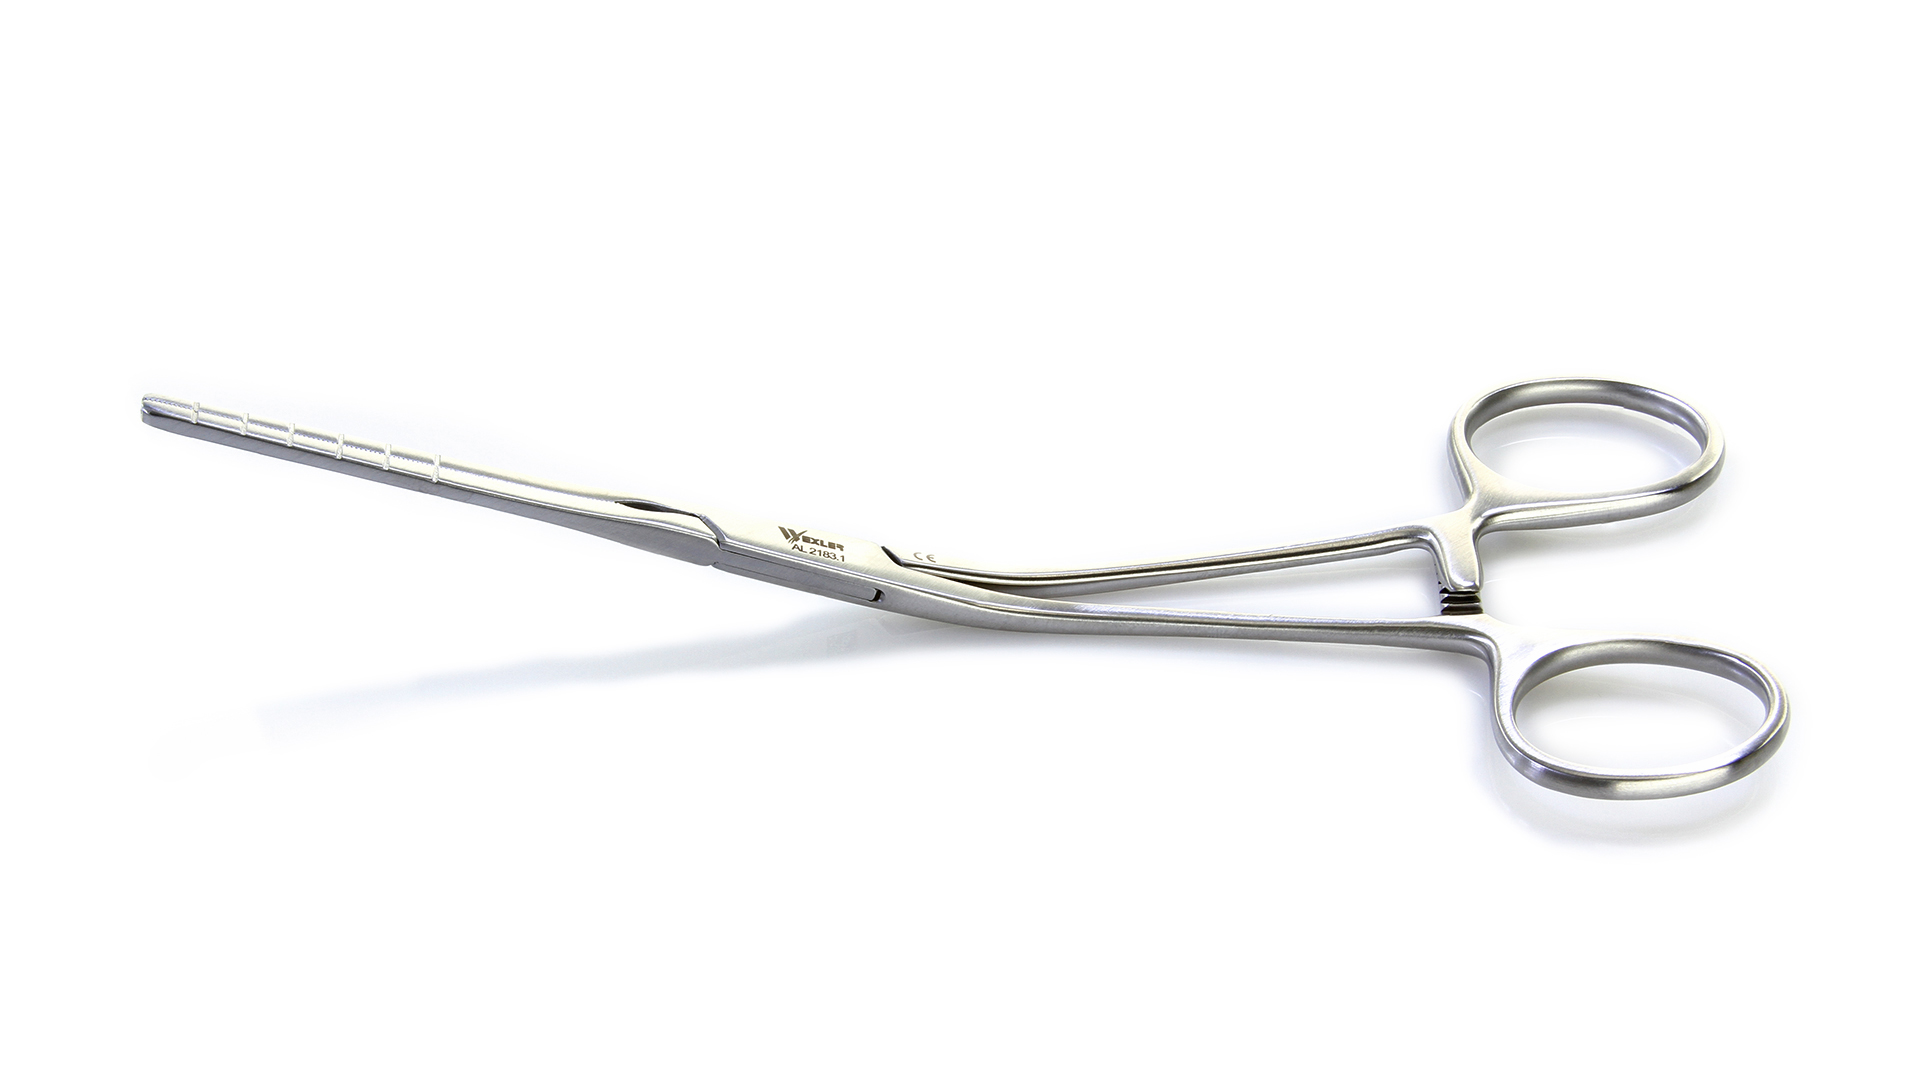 Cooley Pediatric Clamp - 42.5mm straight Cooley Atraumatic jaws